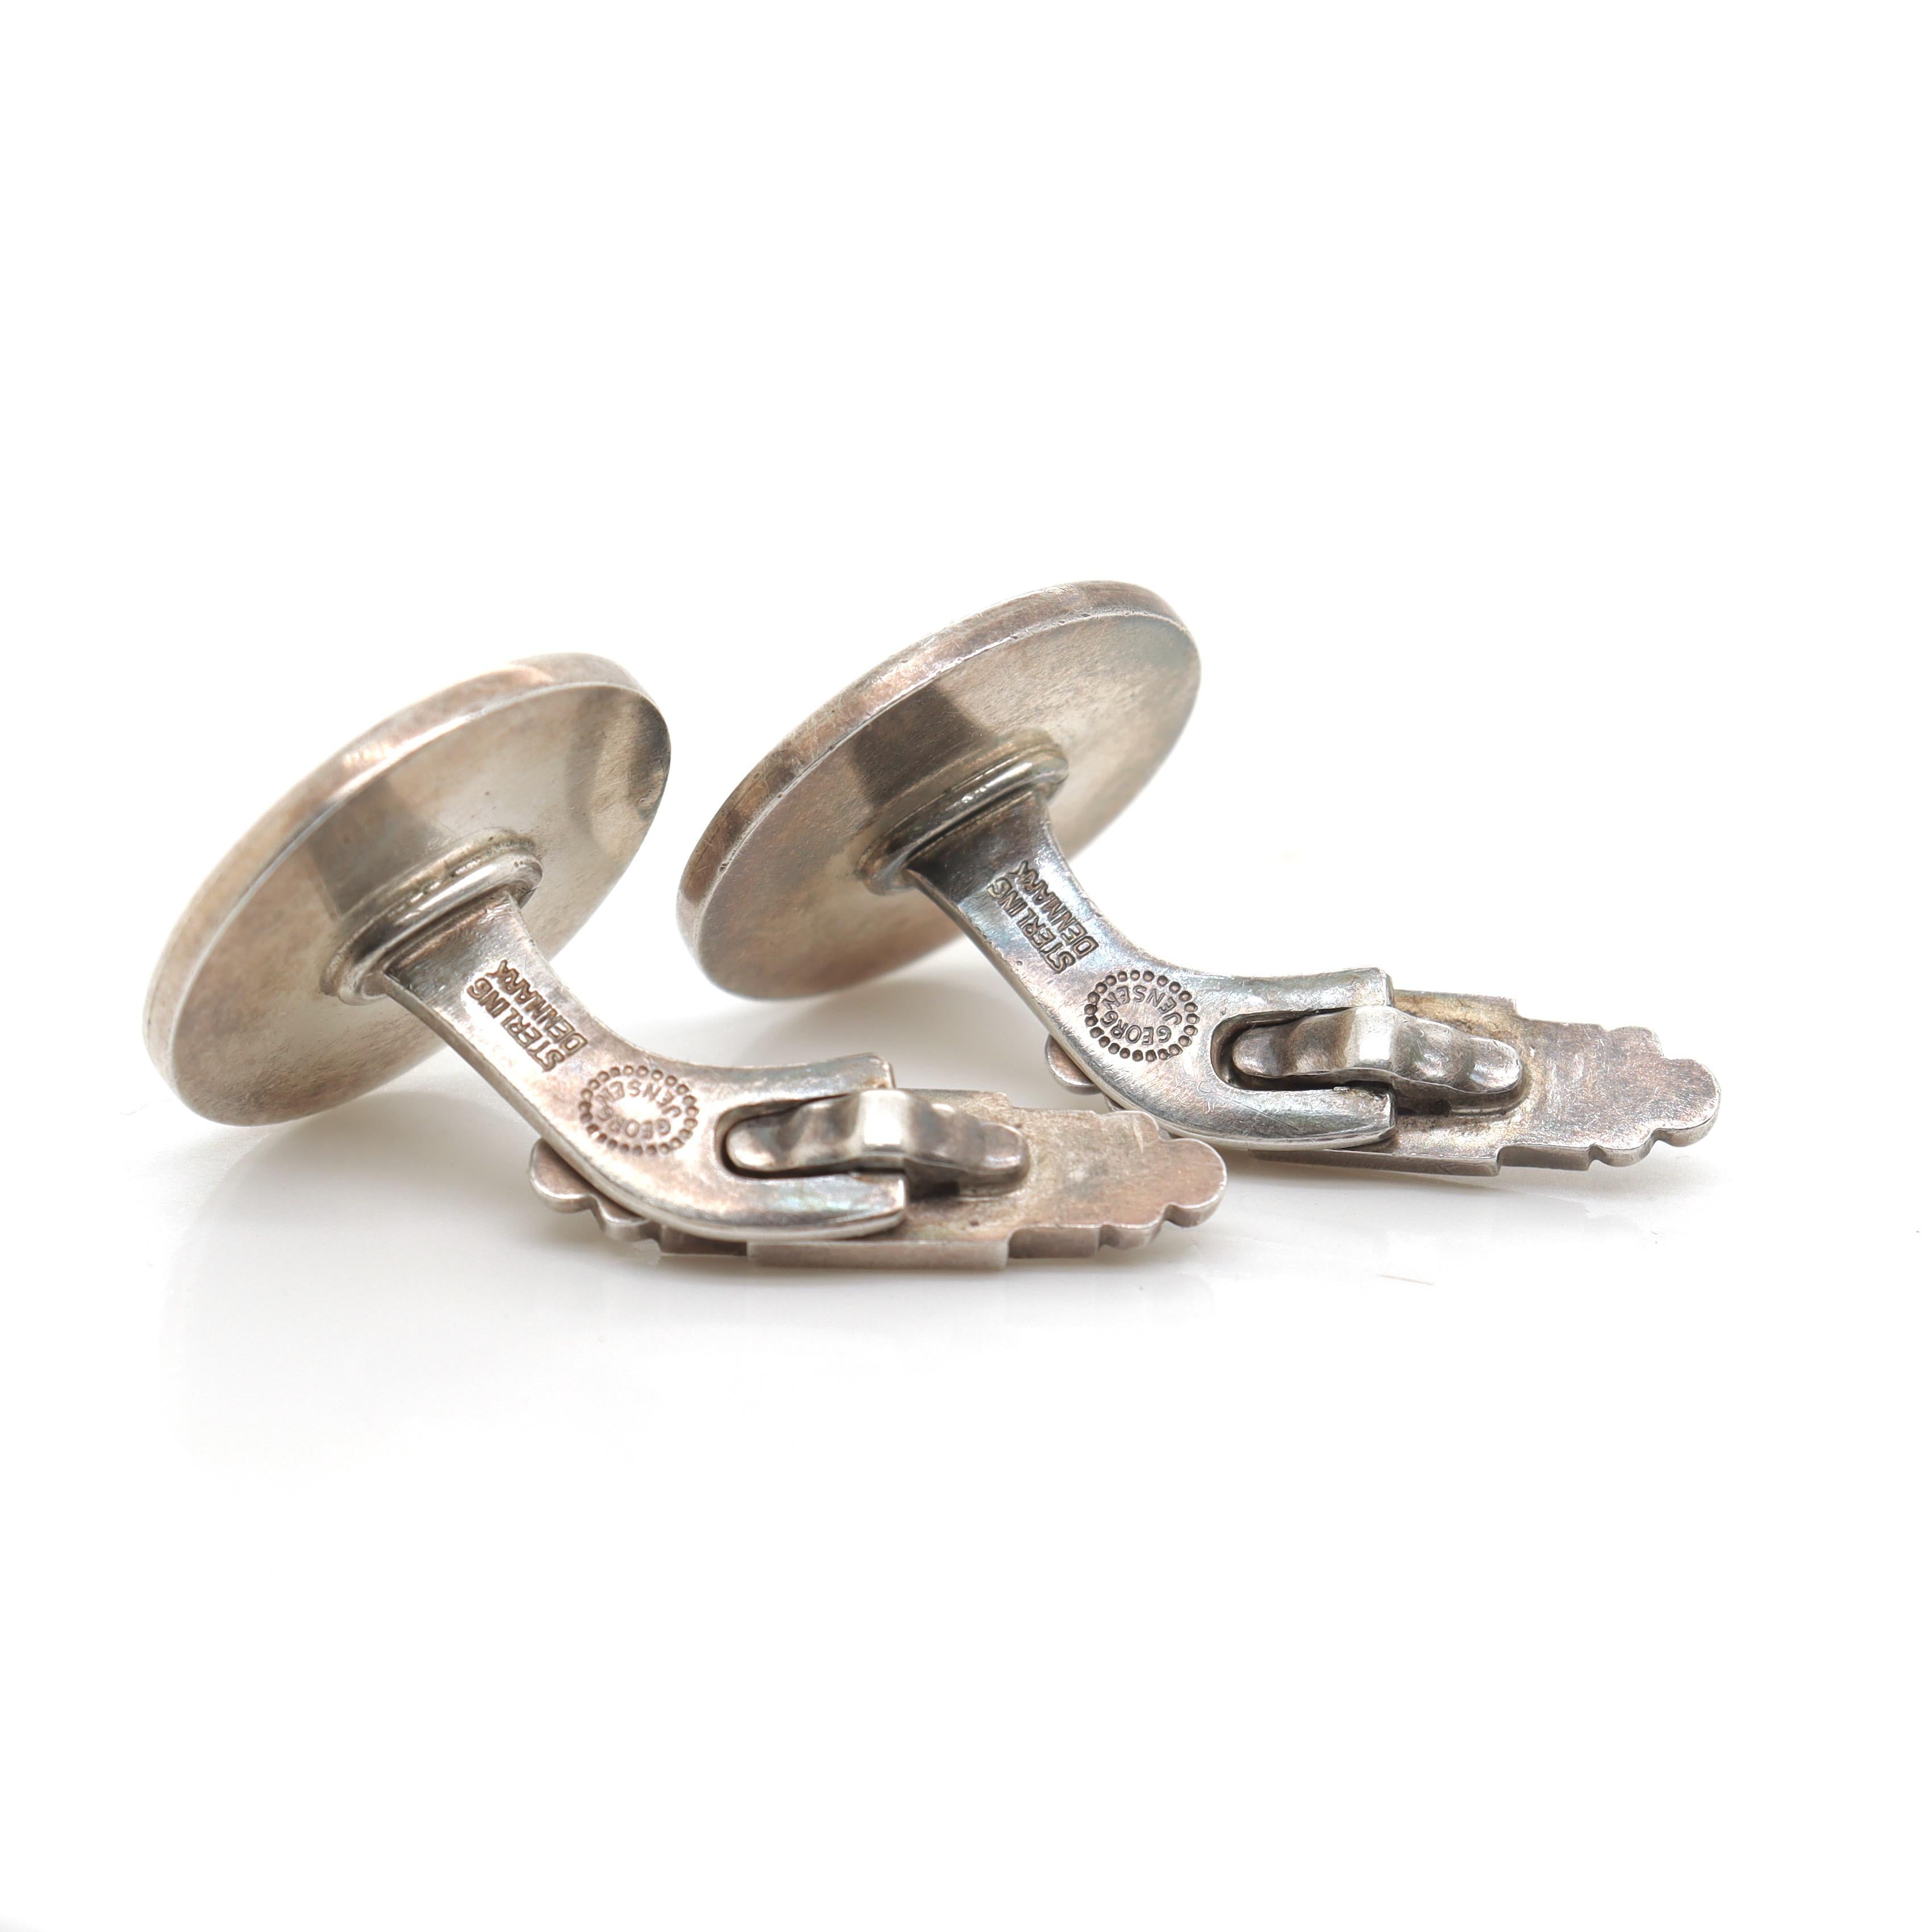 Pair of Georg Jensen Sterling Silver Cufflinks No. 57 For Sale 6